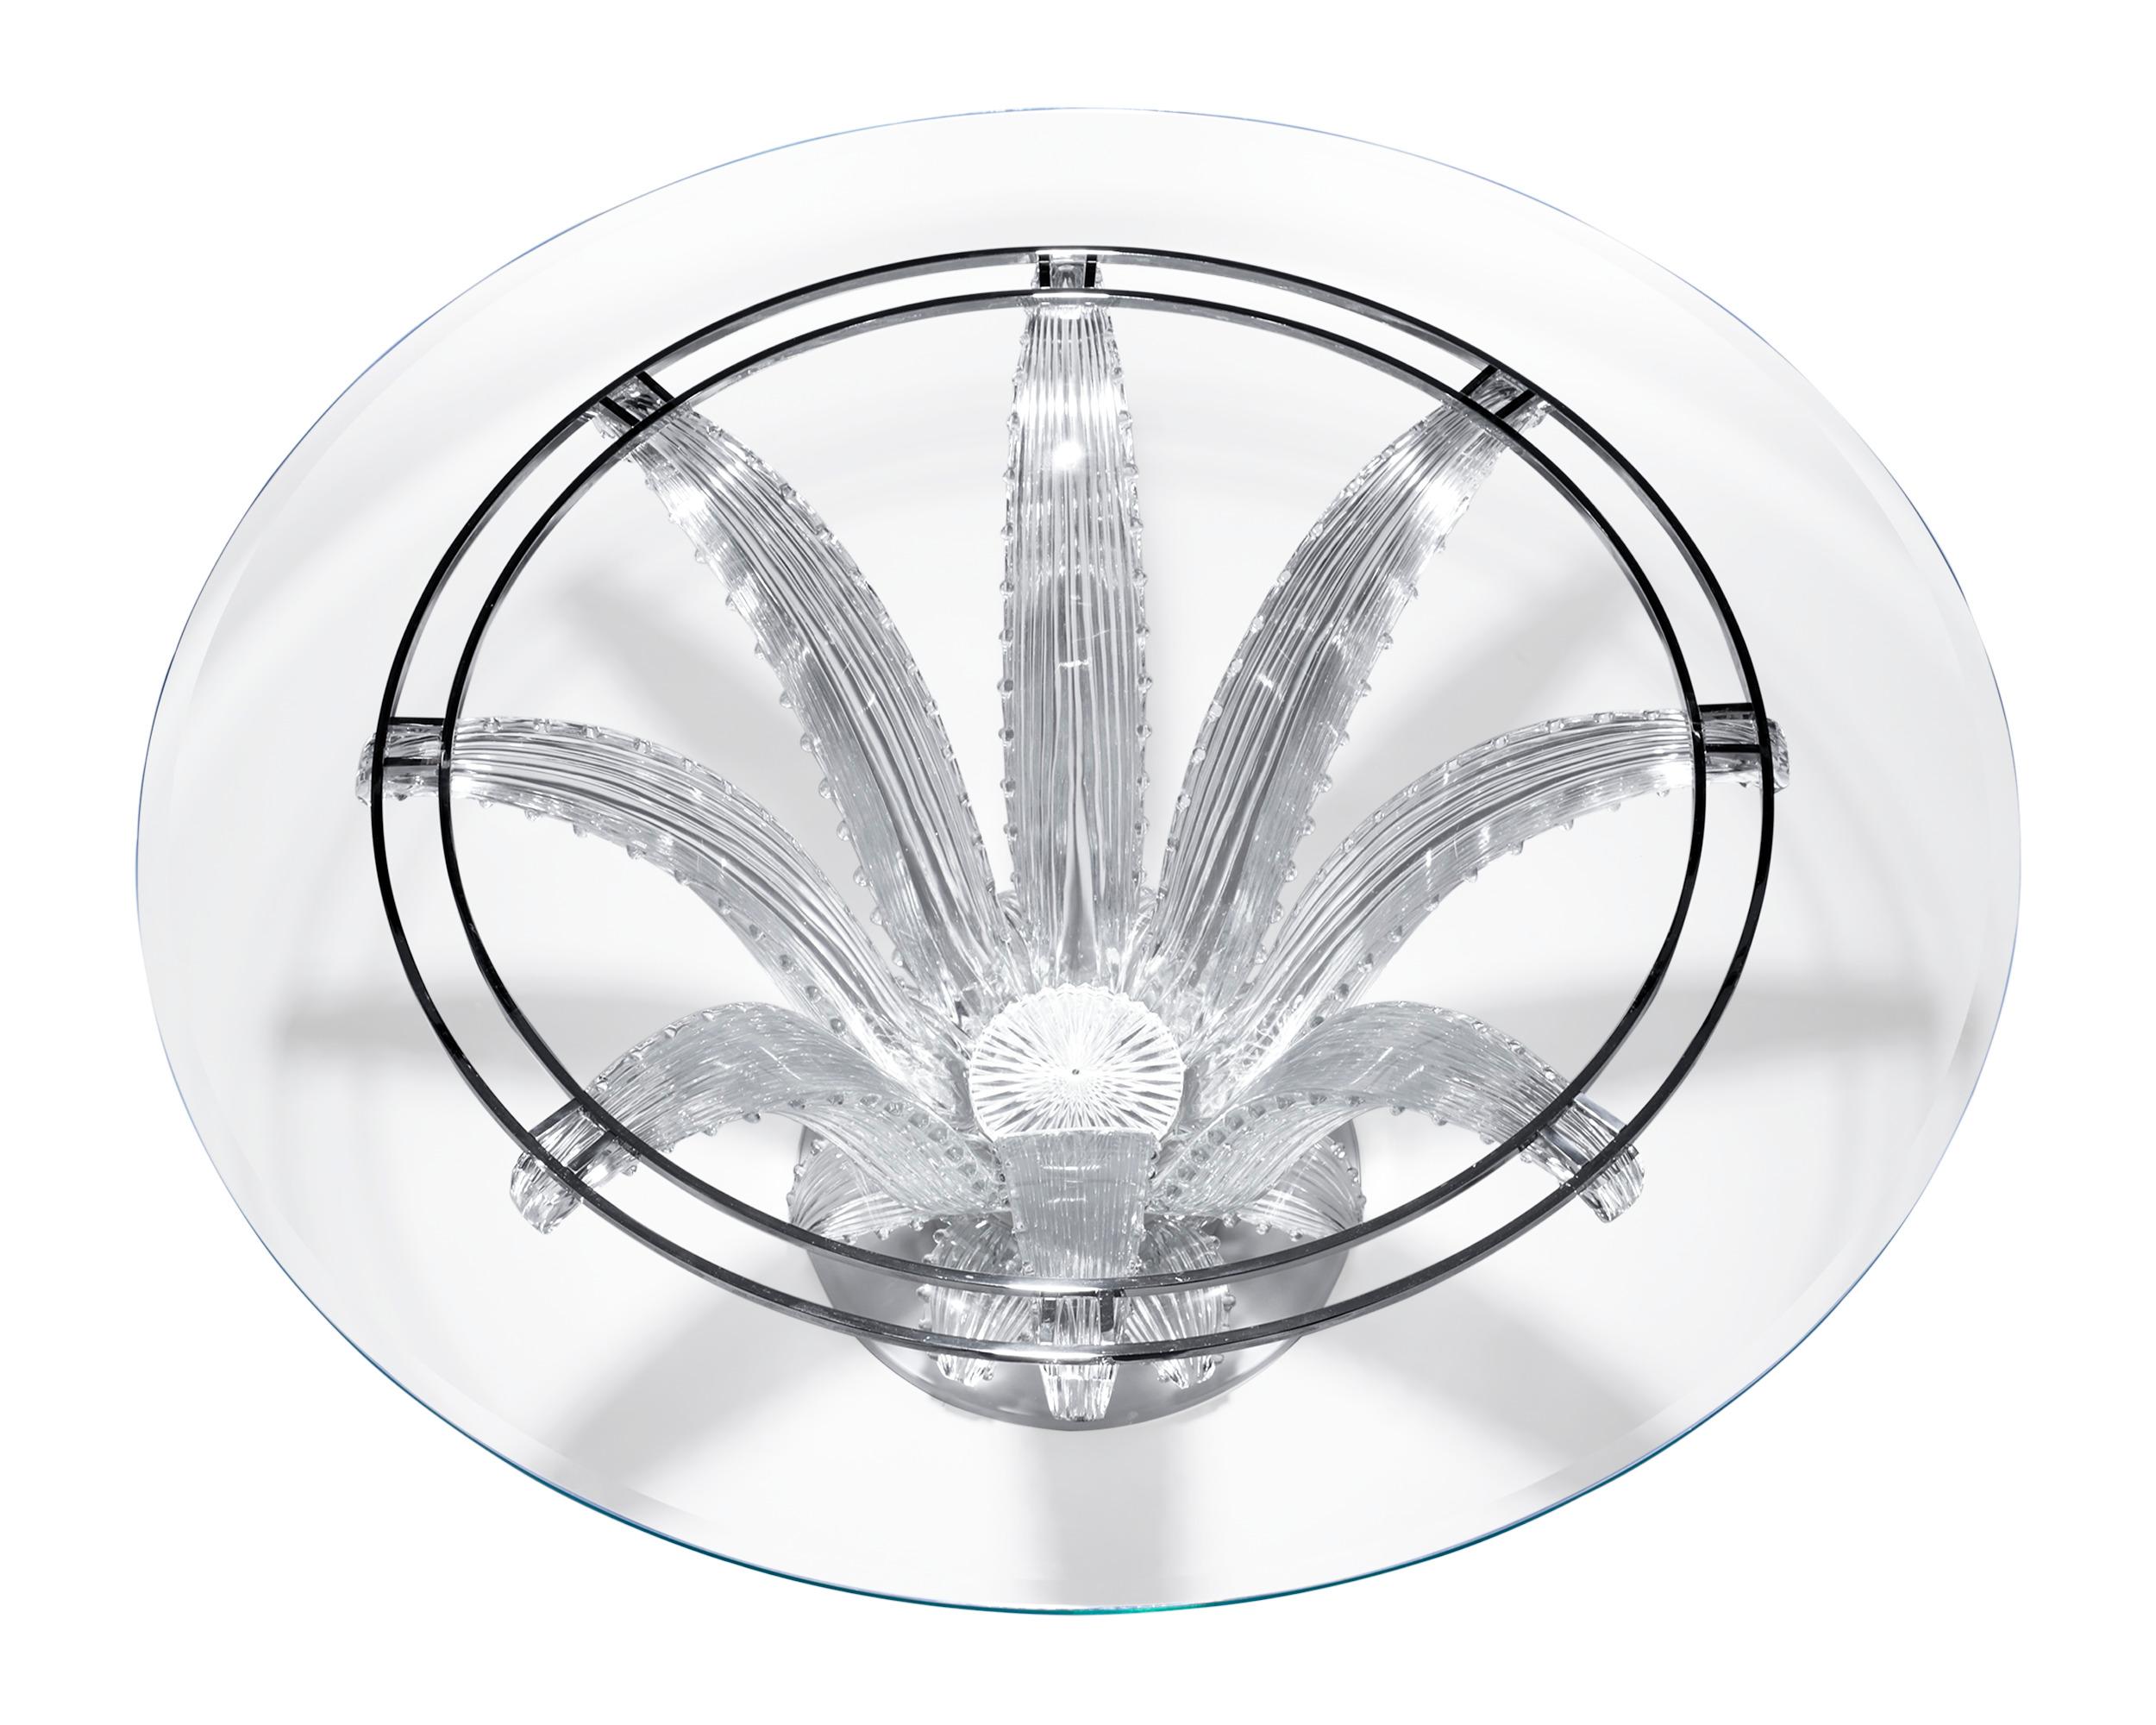 Hailing from the famed French cristallerie Lalique, this chic circular cactus table embodies the elegance and artistry of the firm’s best creations. Designed in 1951 by Marc Lalique, son of René Lalique, this table features one of the French firm’s